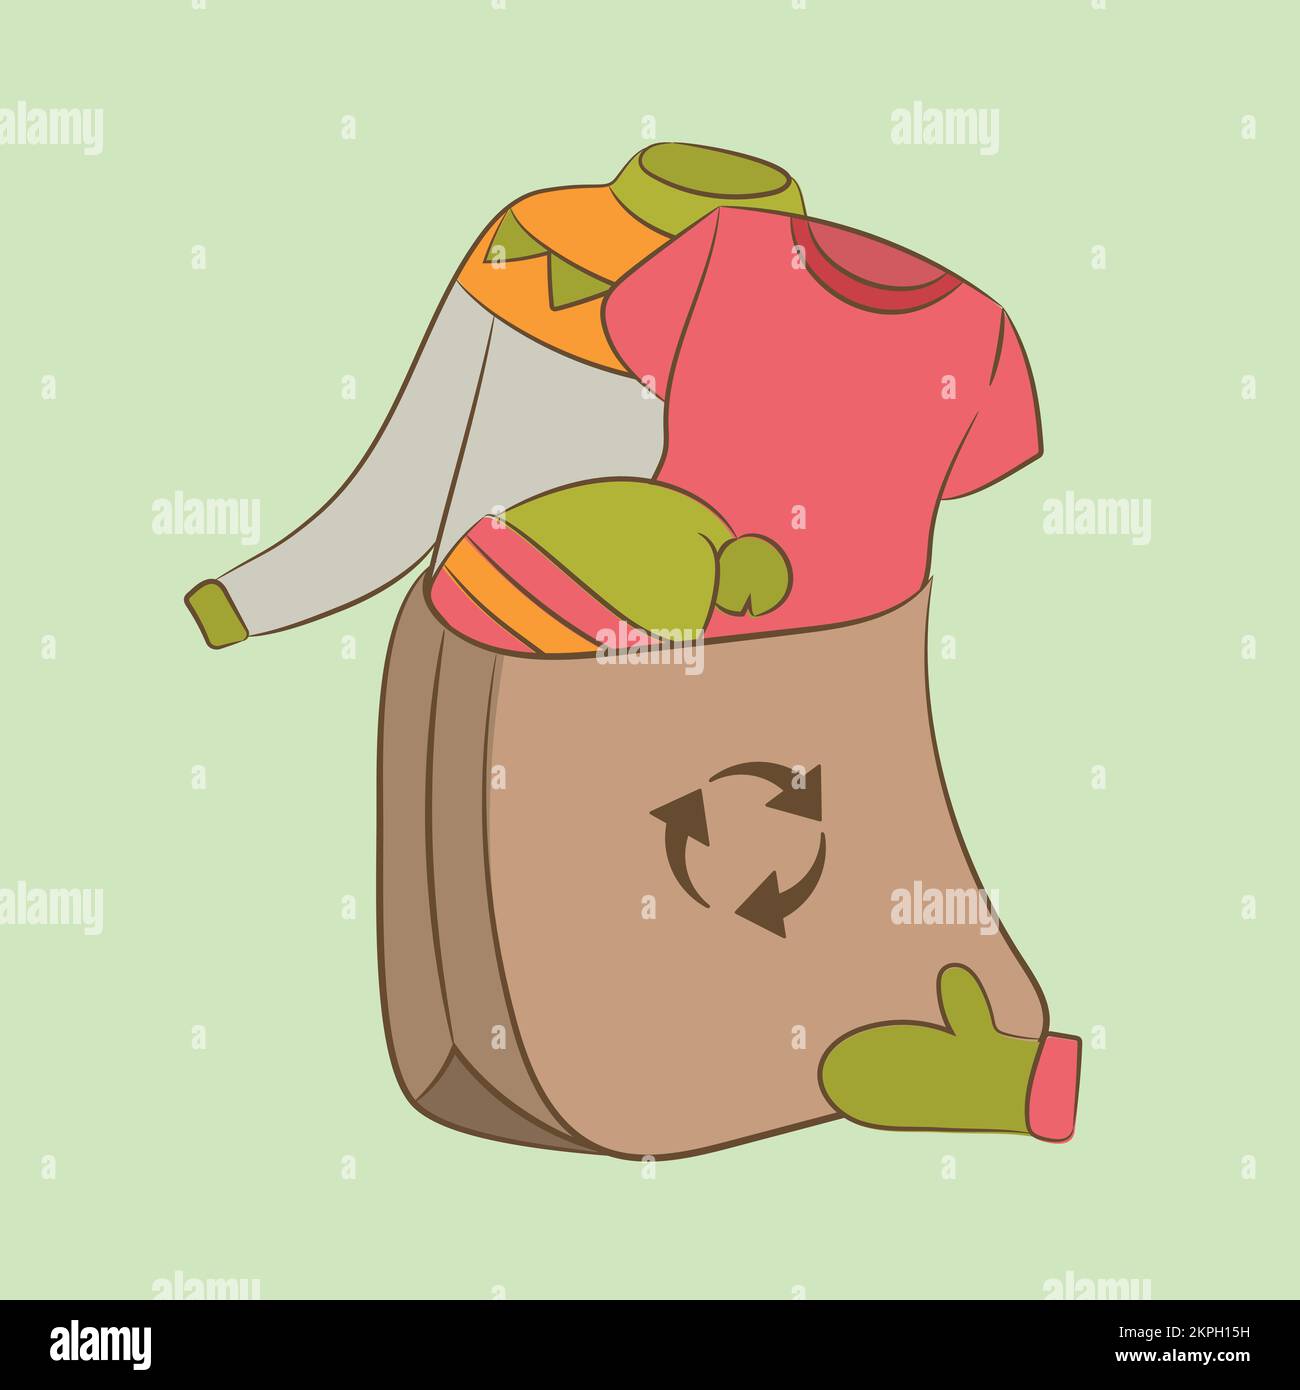 Garment waste Stock Vector Images - Alamy